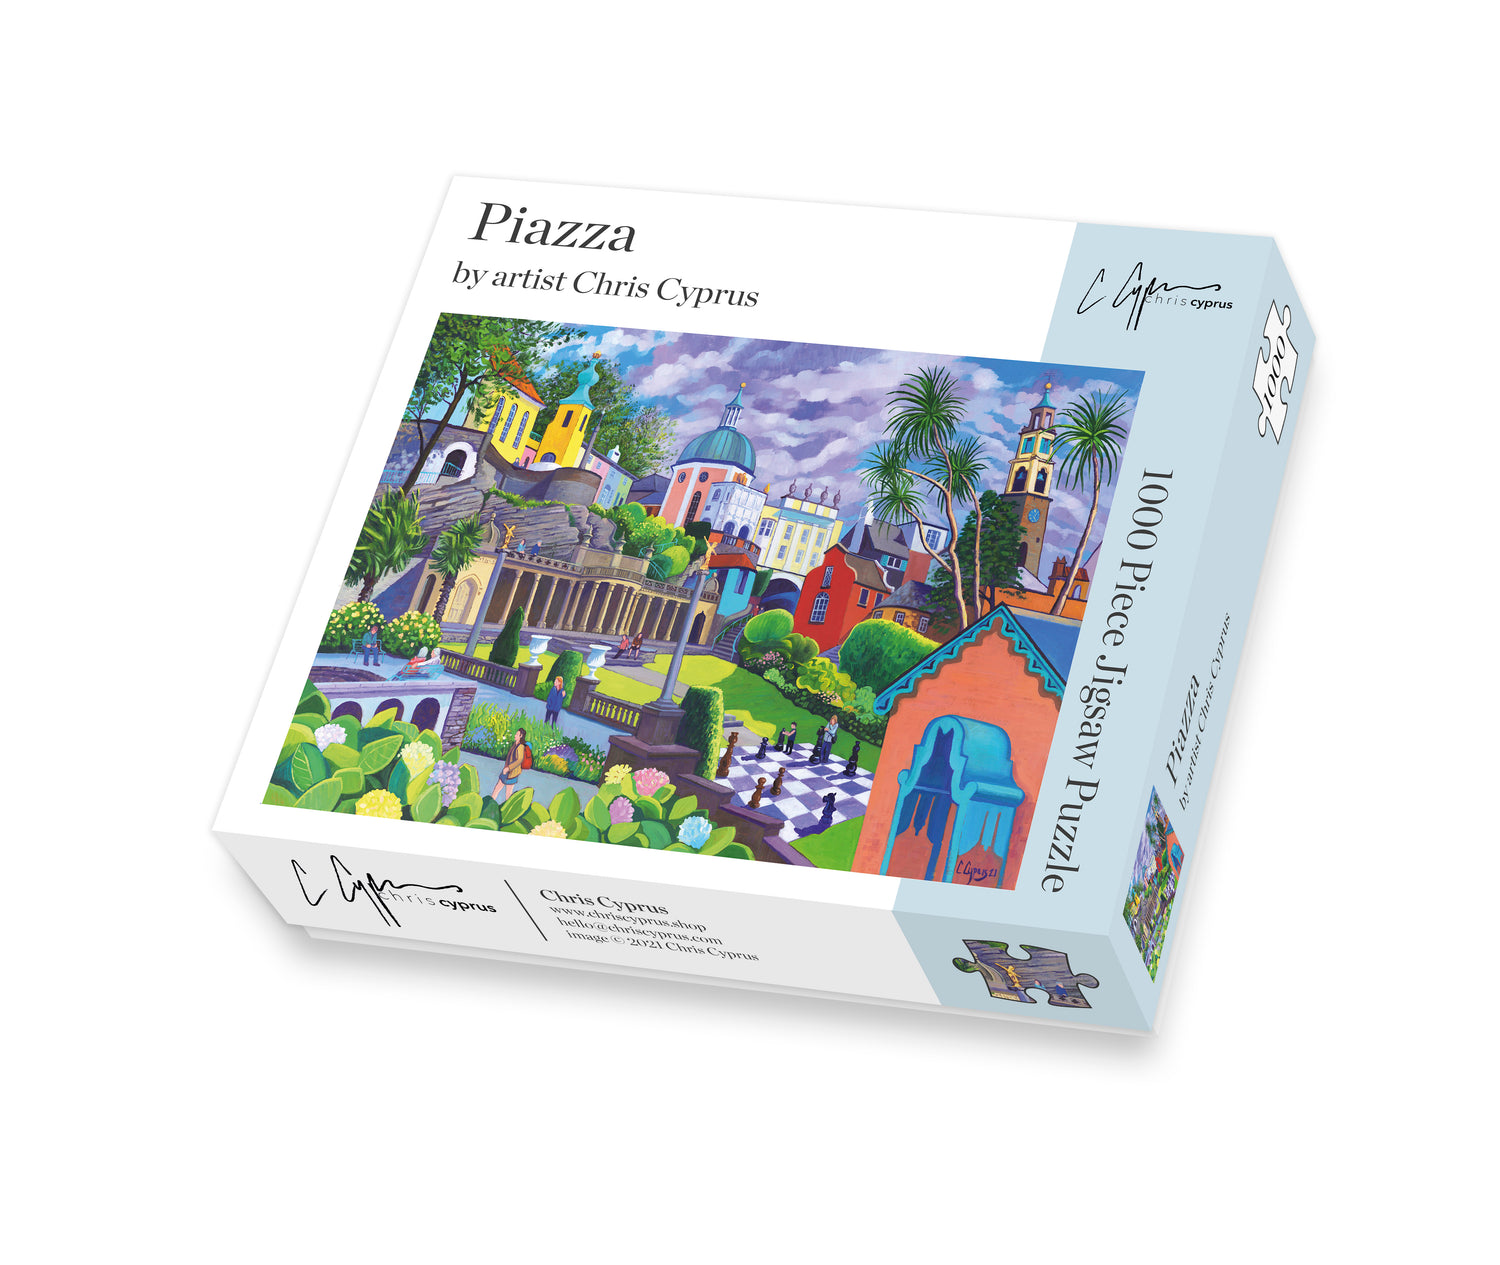 Jigsaws ~ handmade in the UK~ featuring 3 paintings by Chris Cyprus